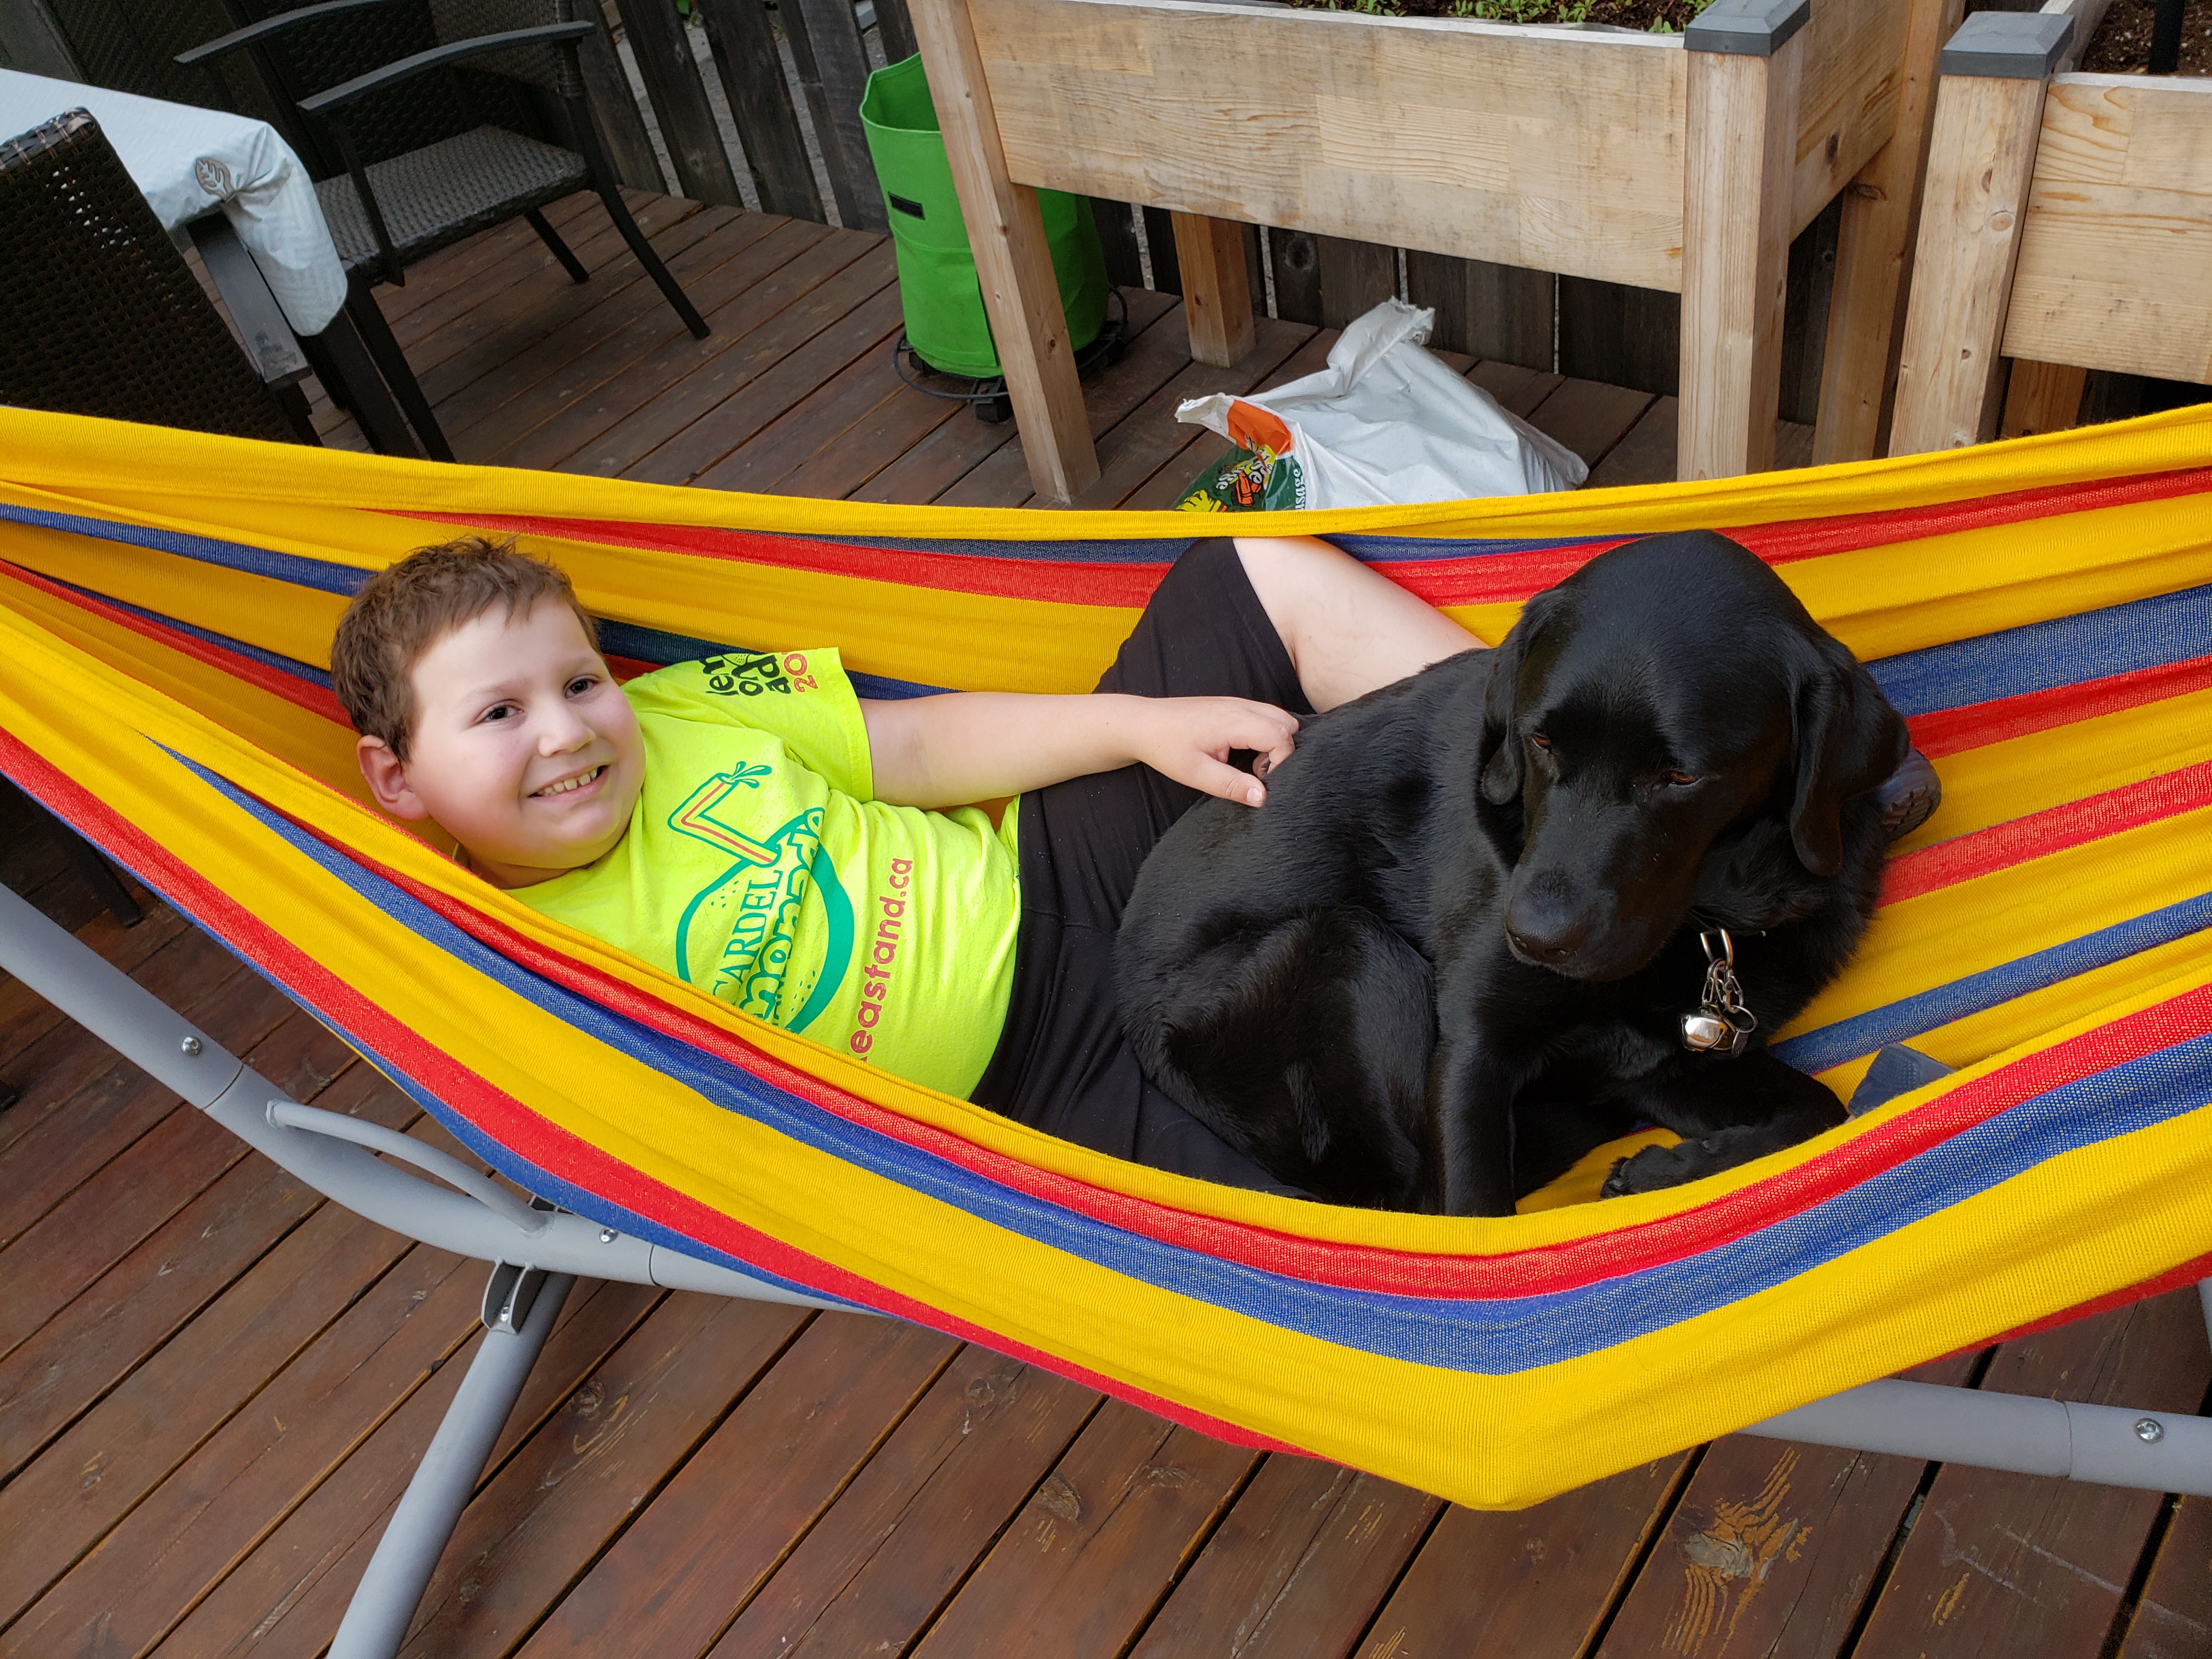 Ollie, a young boy, sits in a hammock at Lake Joe with his buddy dog, Hope, 